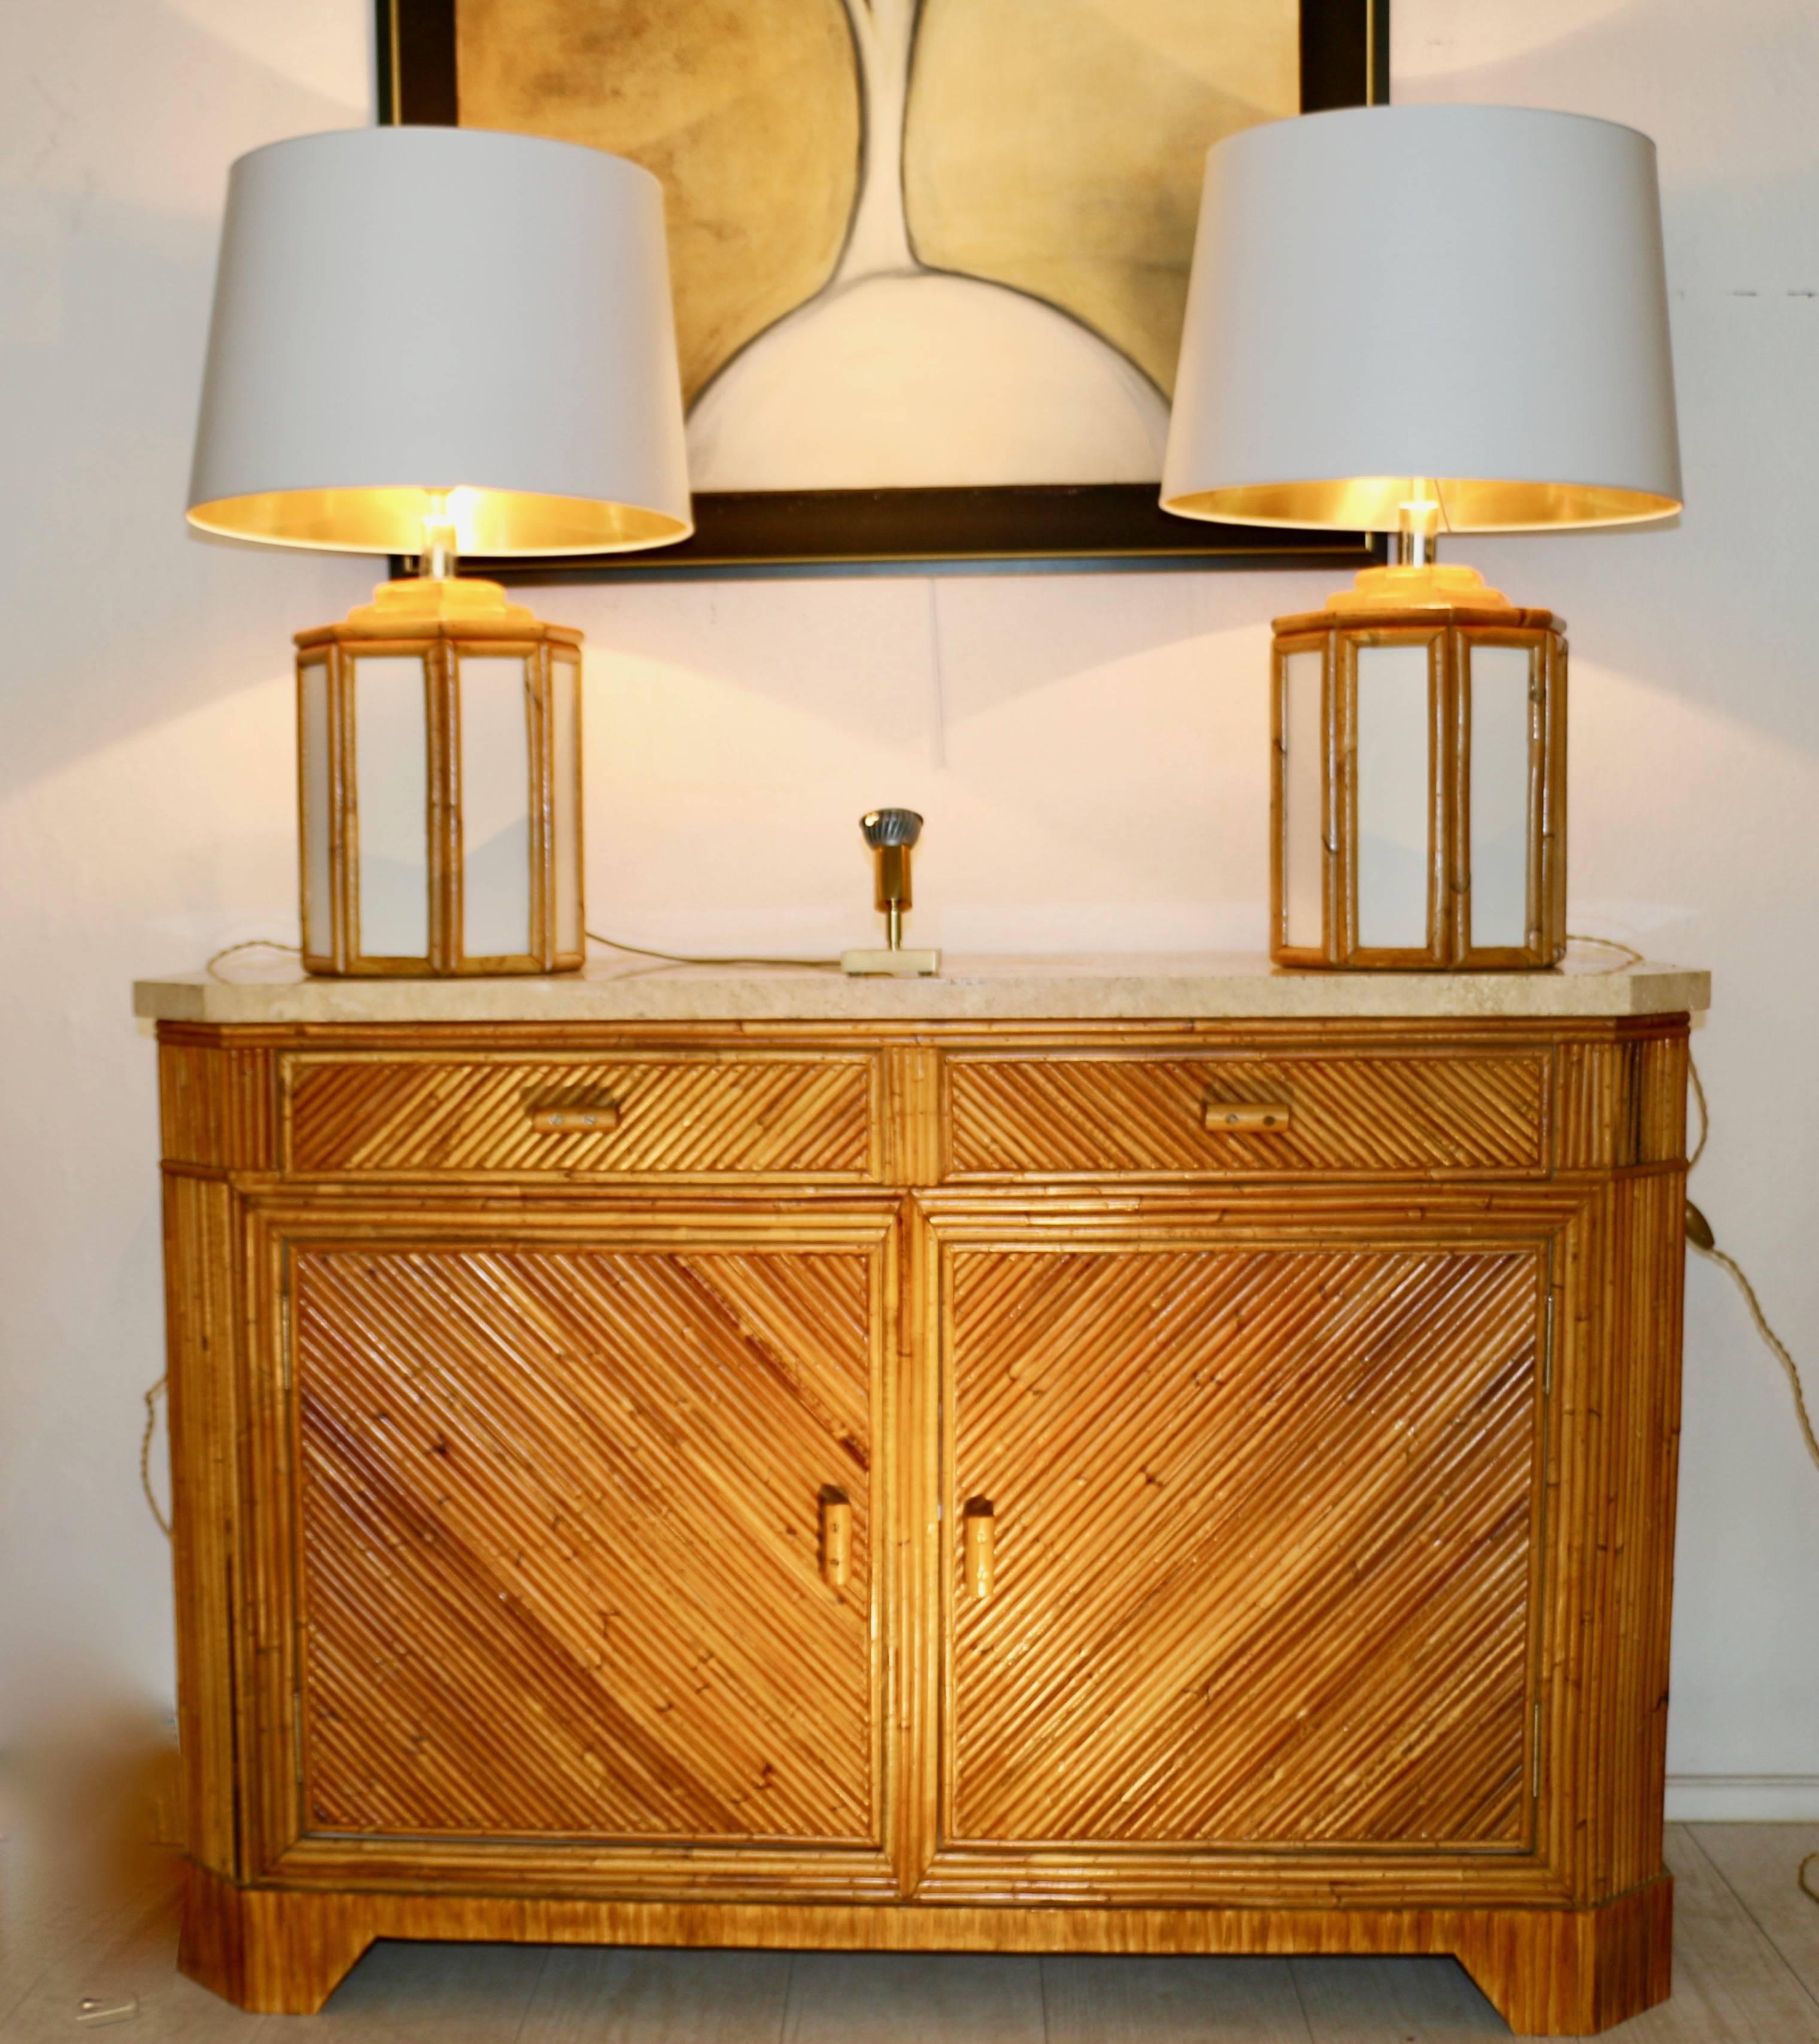 French Pair of Table Lamps with a Bamboo Decor, circa 1980